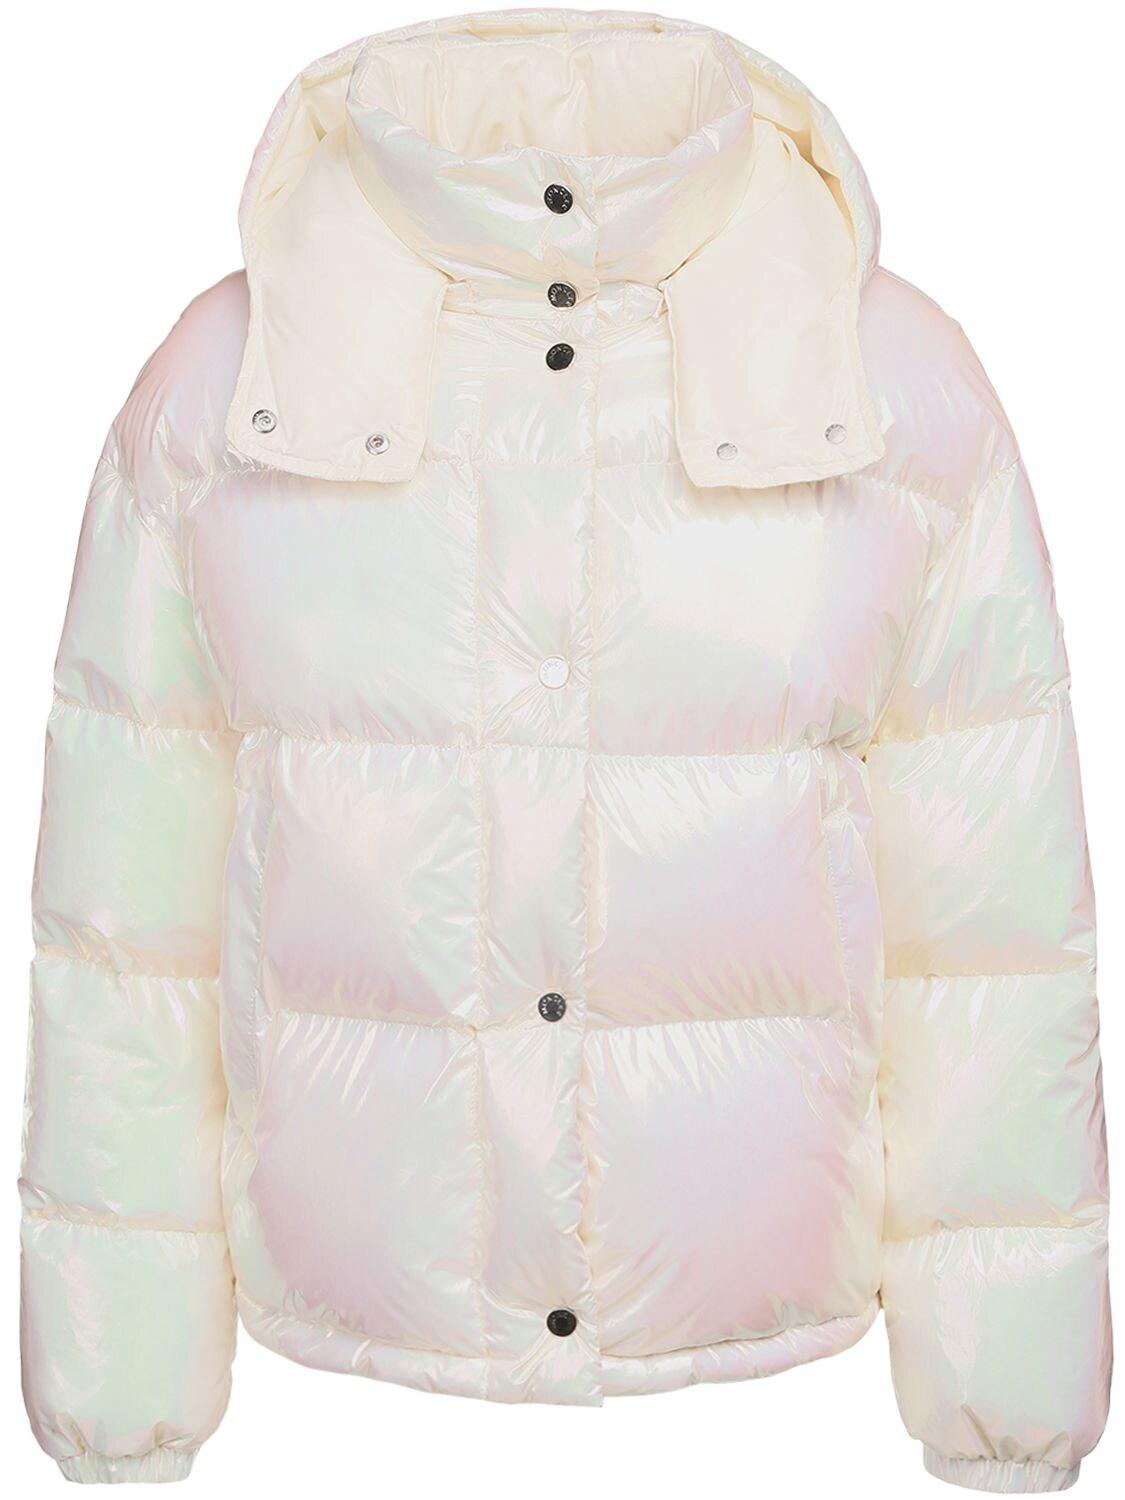 Moncler Daos Shiny Down Jacket in Pearl White (White) | Lyst